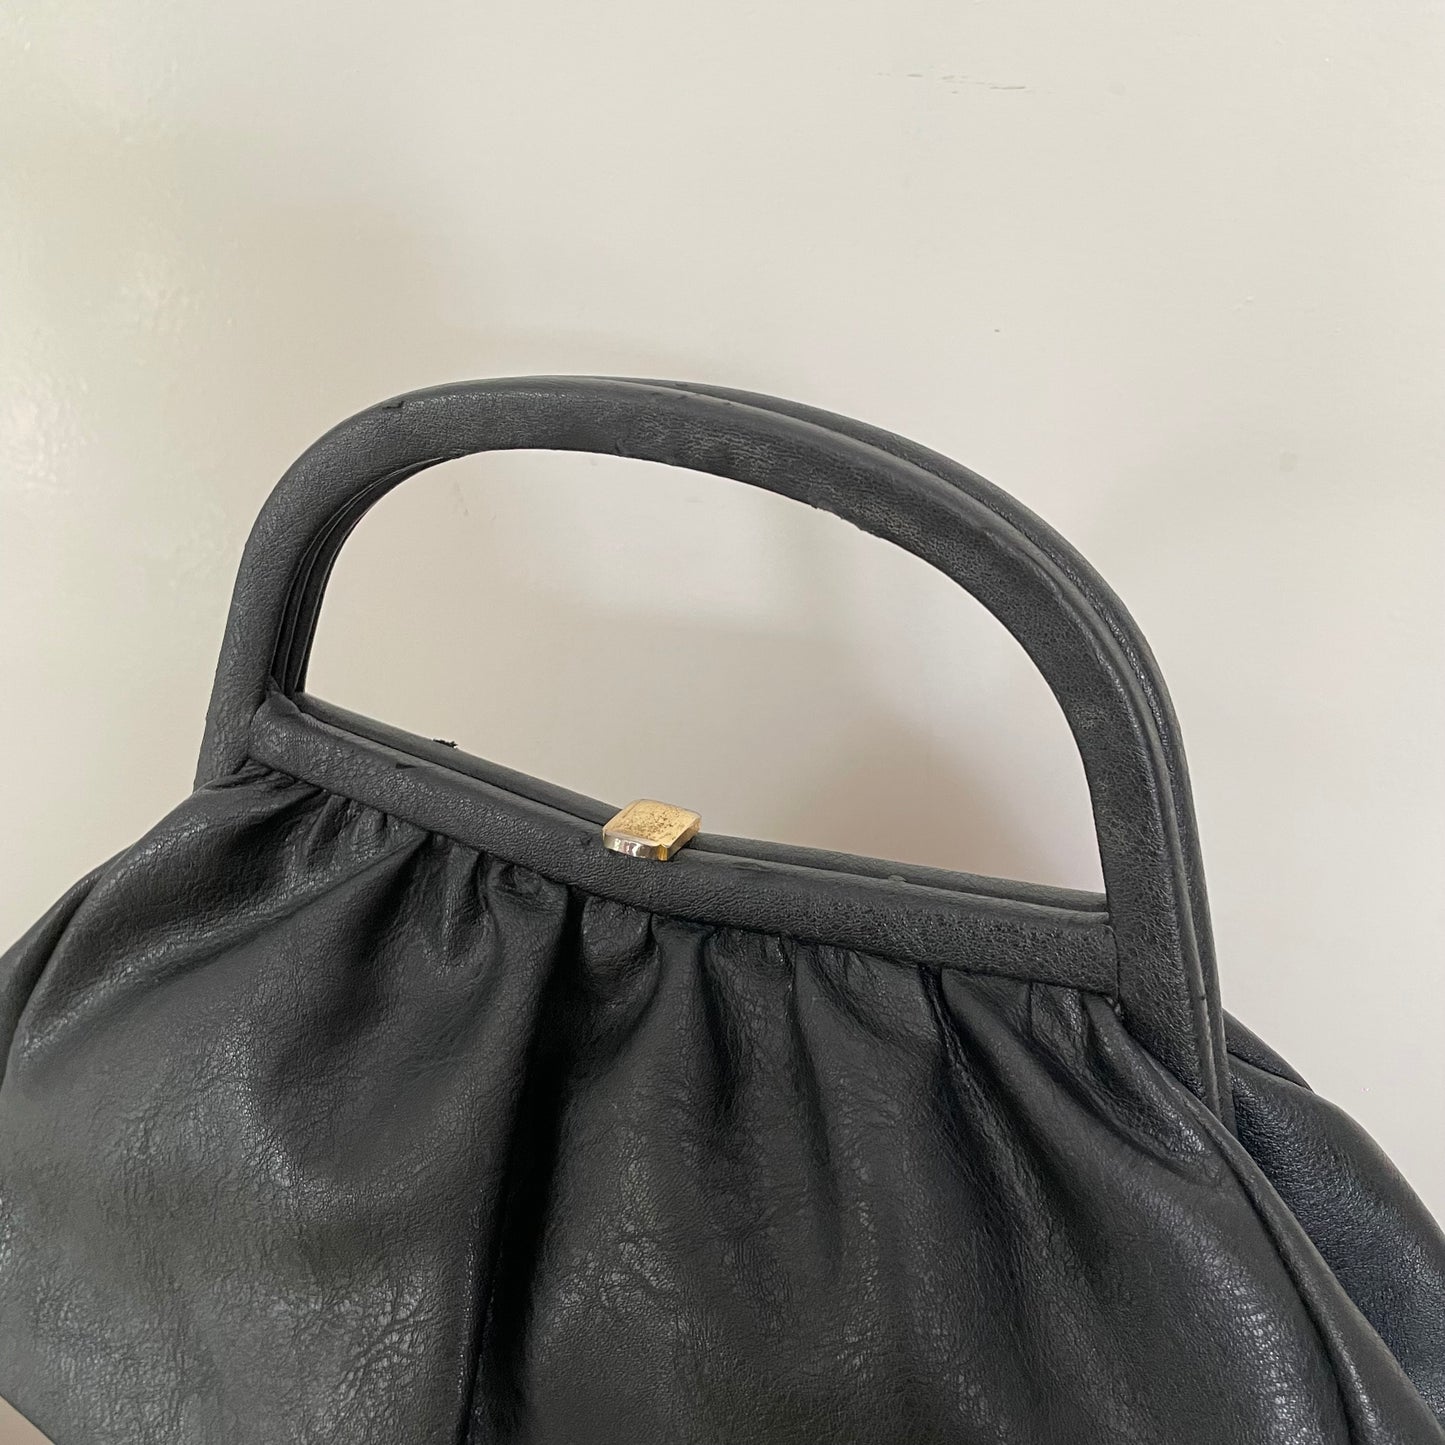 Vintage 1960s Vegan Leather Bag With Gold Clasp